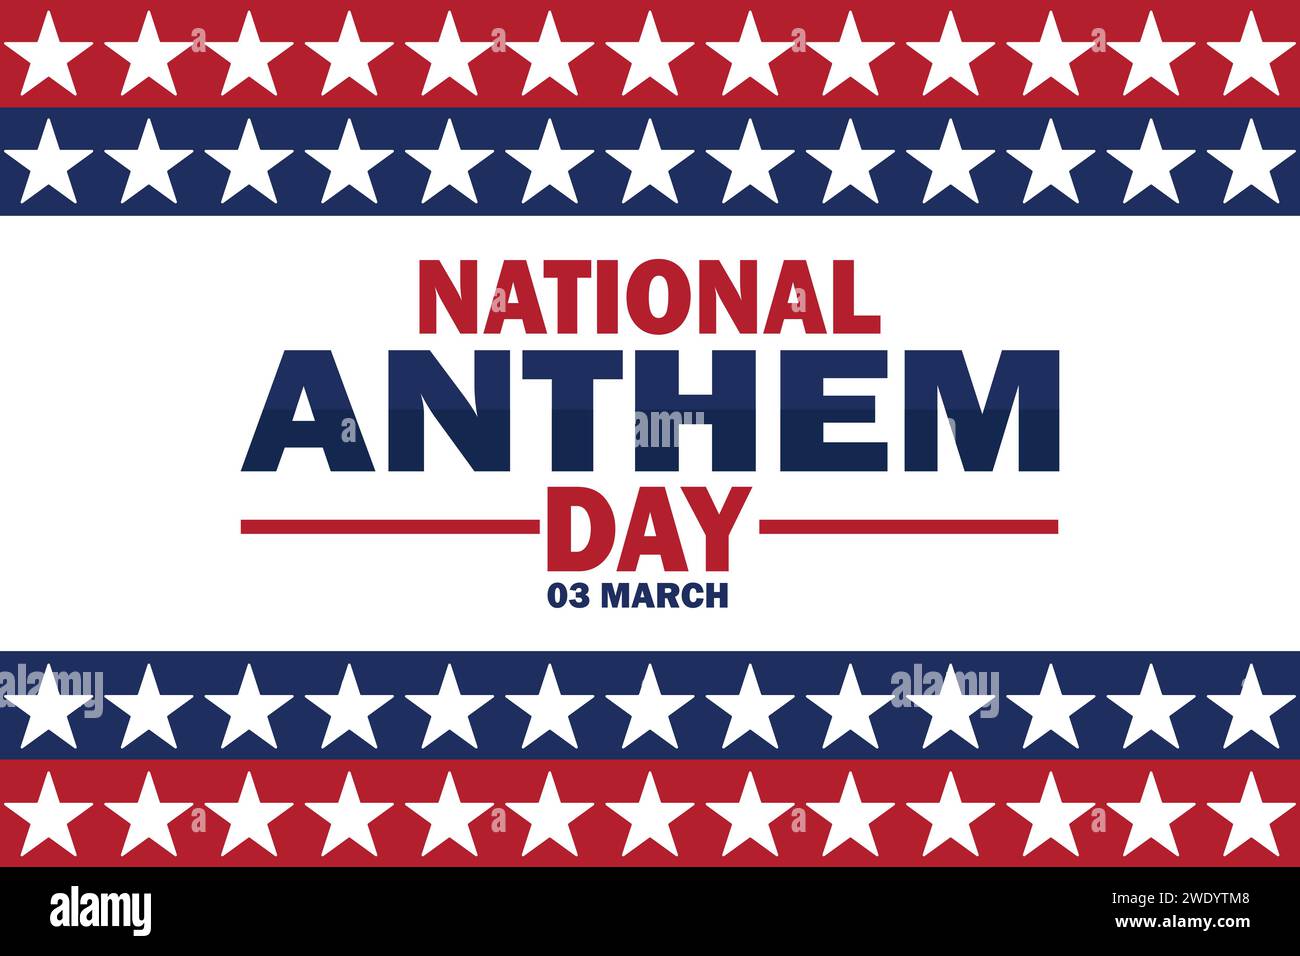 National Anthem Day Vector illustration. 03 March. Holiday concept. Template for background, banner, card, poster with text inscription. Stock Vector